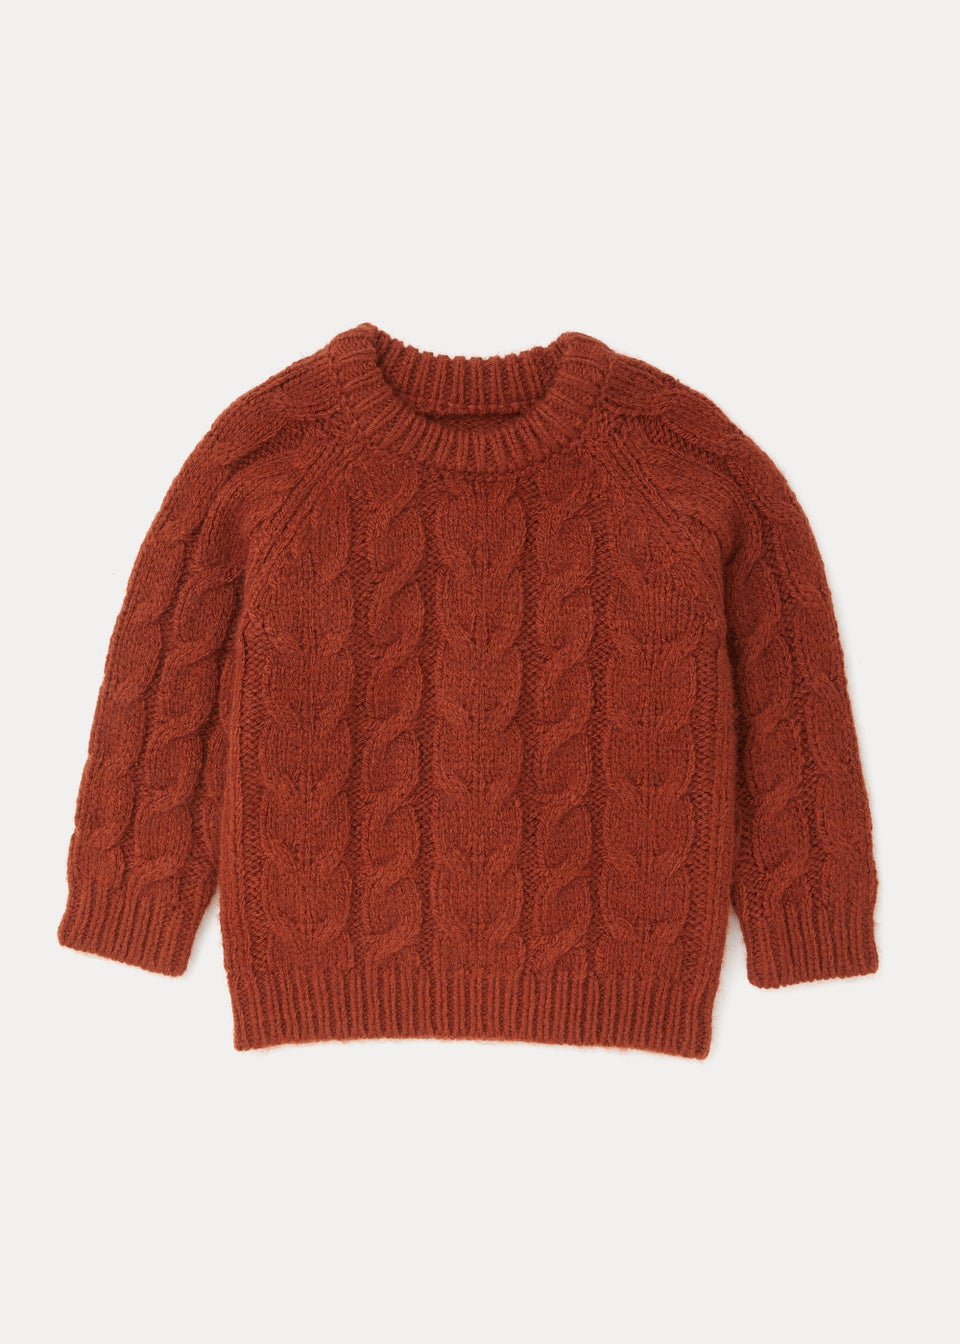 Boys Rust Cable Knit Jumper (9mths-6yrs)